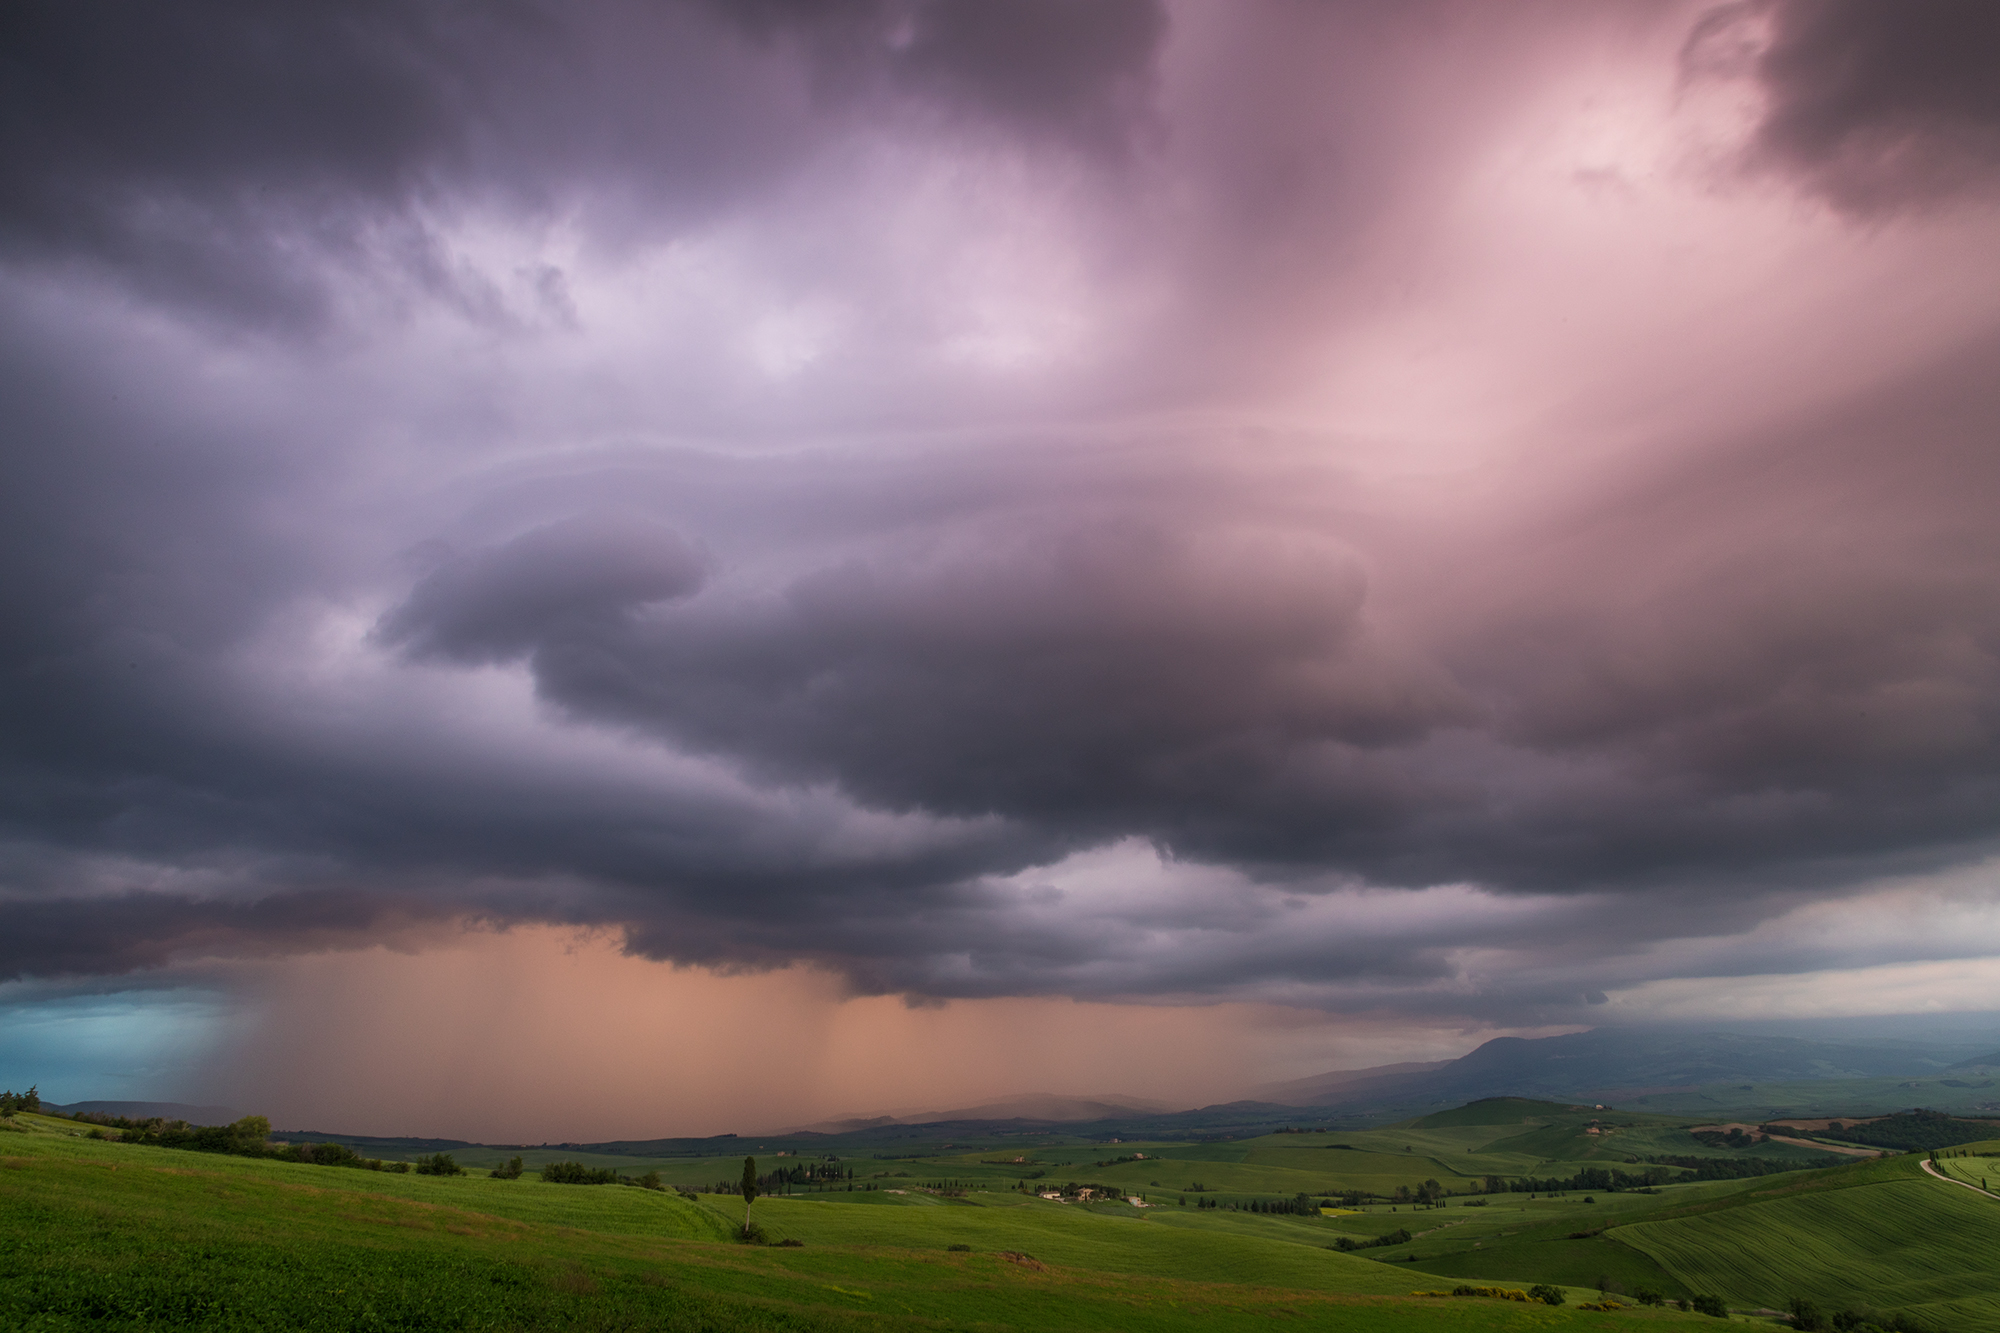 A Wicked Storm Approaches, Tuscany